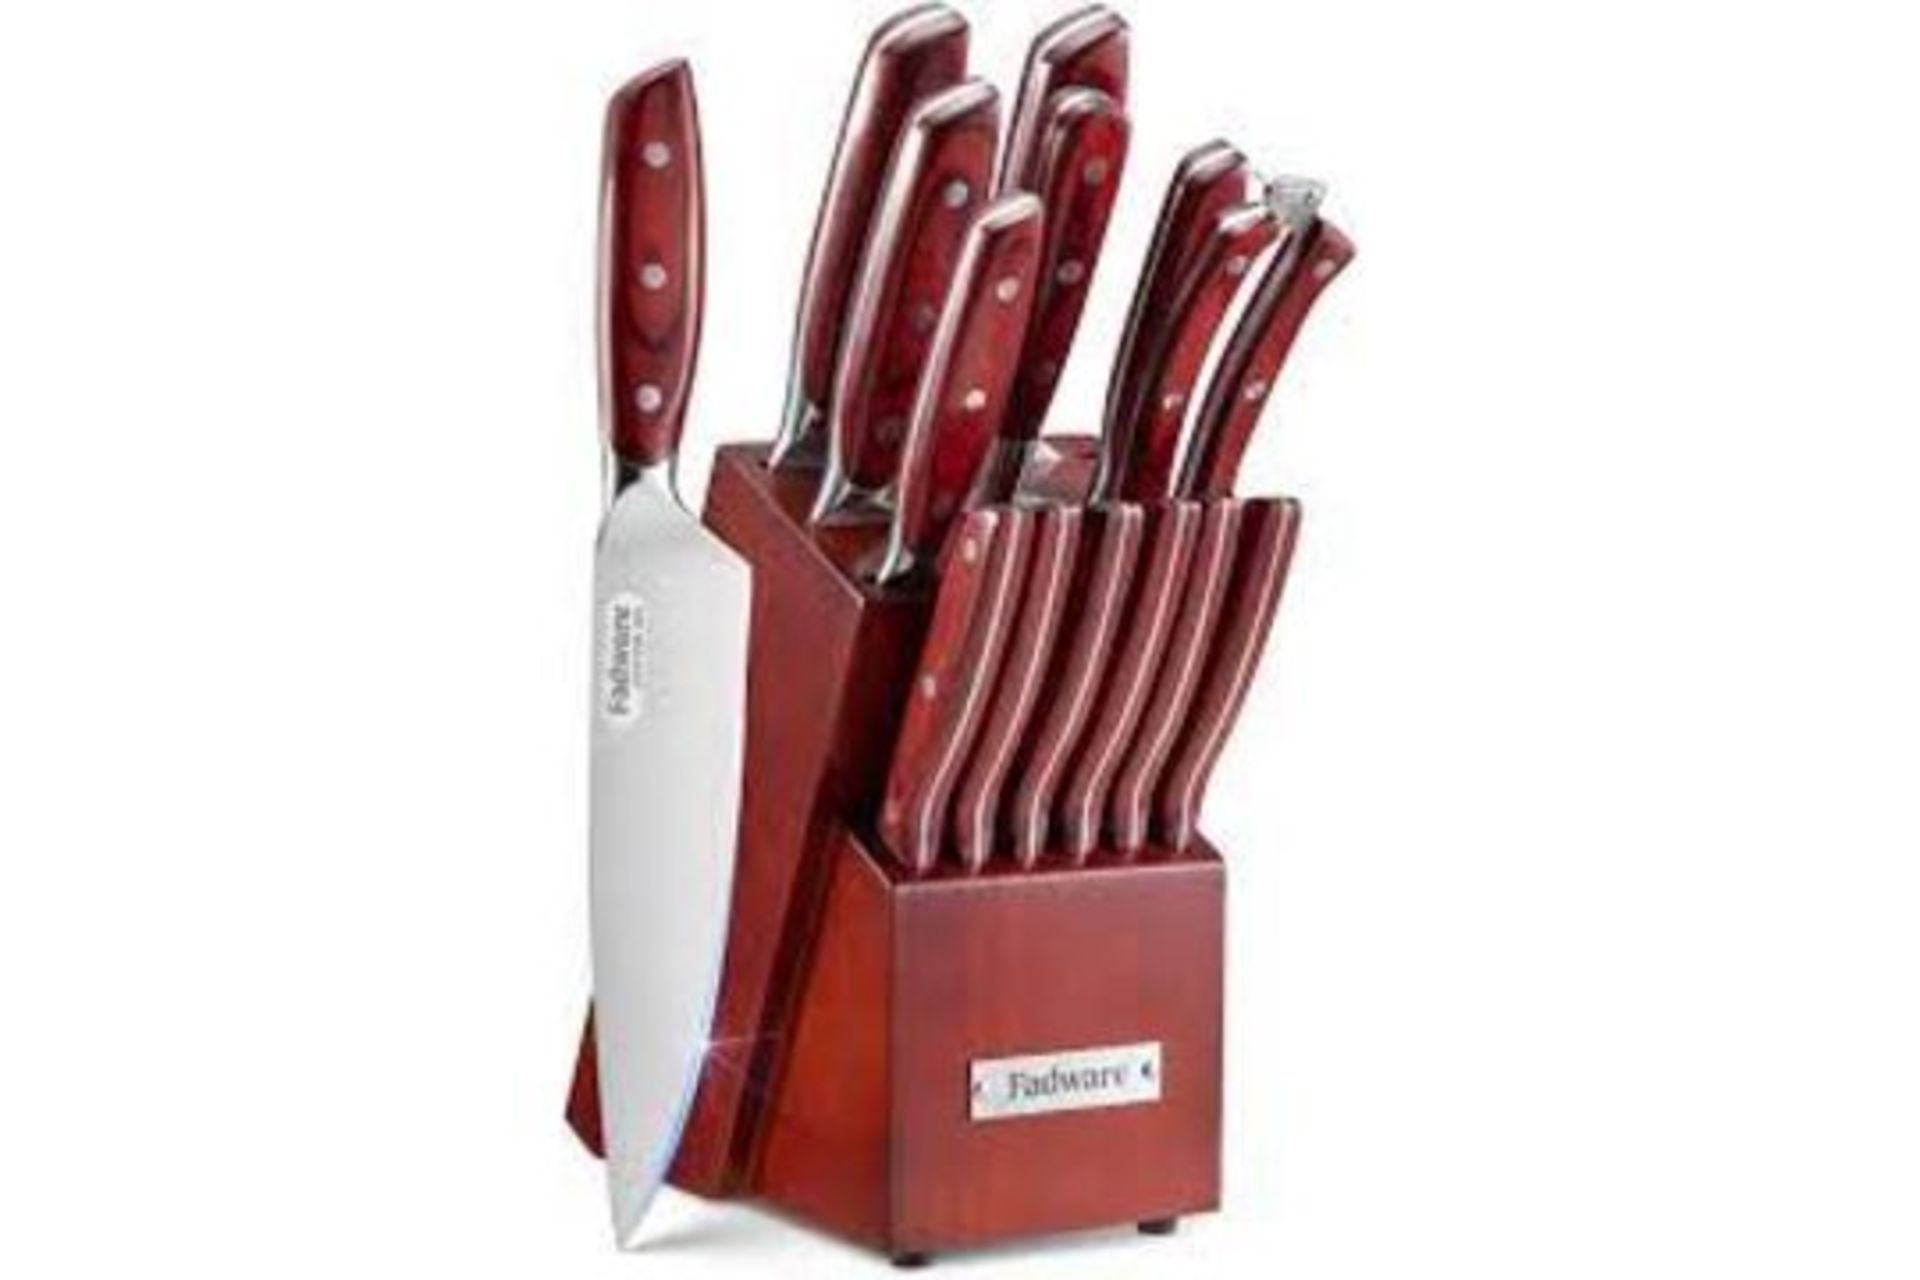 BRAND NEW FADWARE PREMIUM 14 PIECE KNIFE SET WITH KNIFE BLOCK AND SHARPENING STEEL RED RRP £149